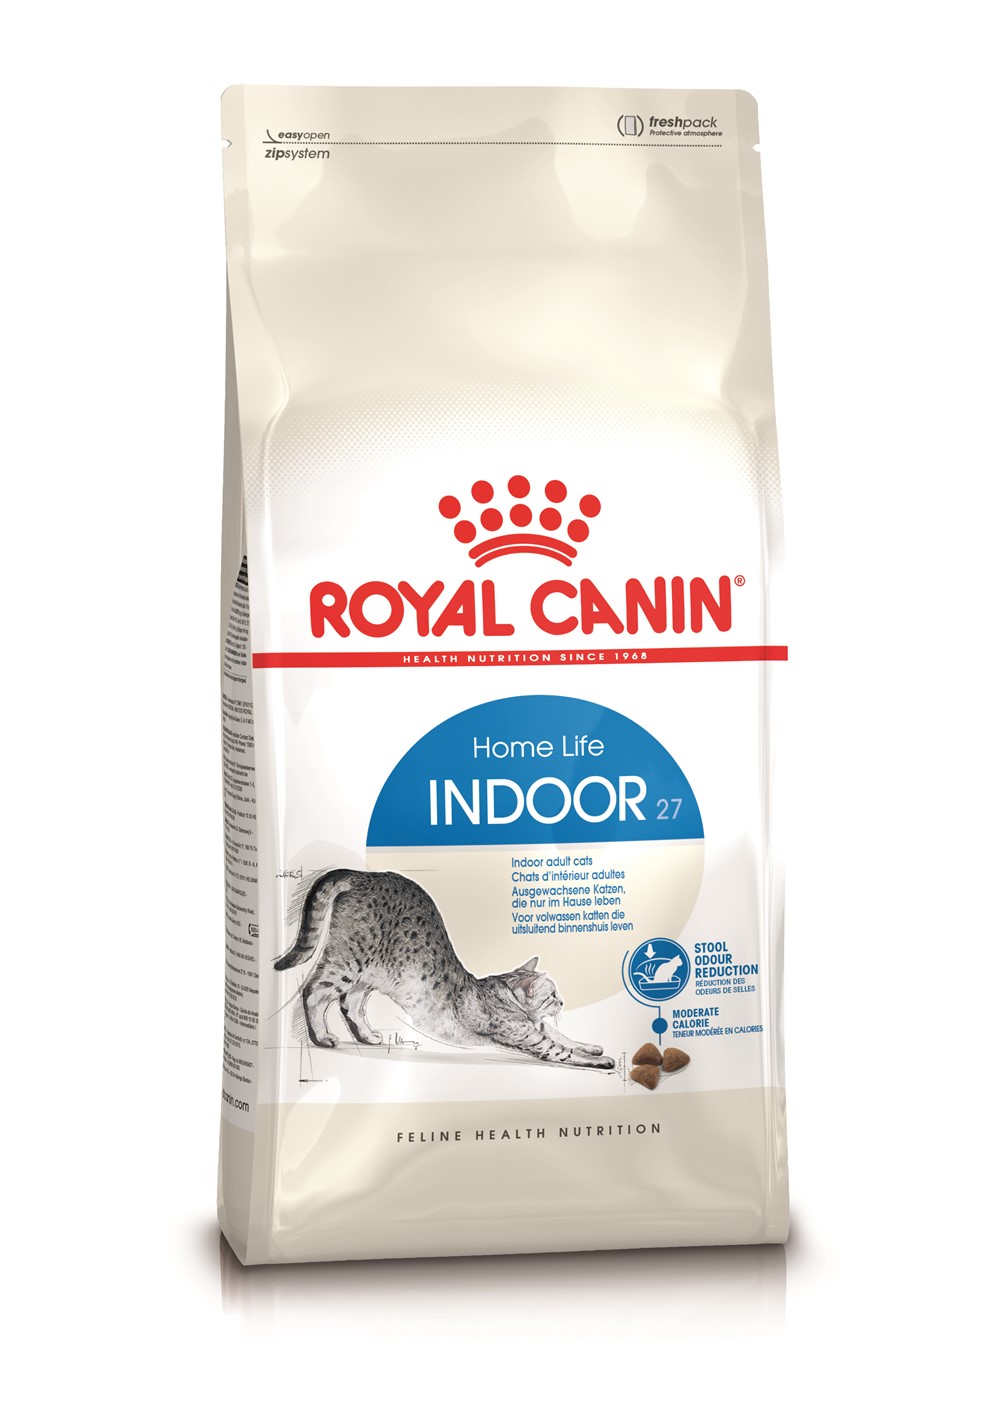 Croquette Chat Indoor 27 2kg - ROYAL CANIN 